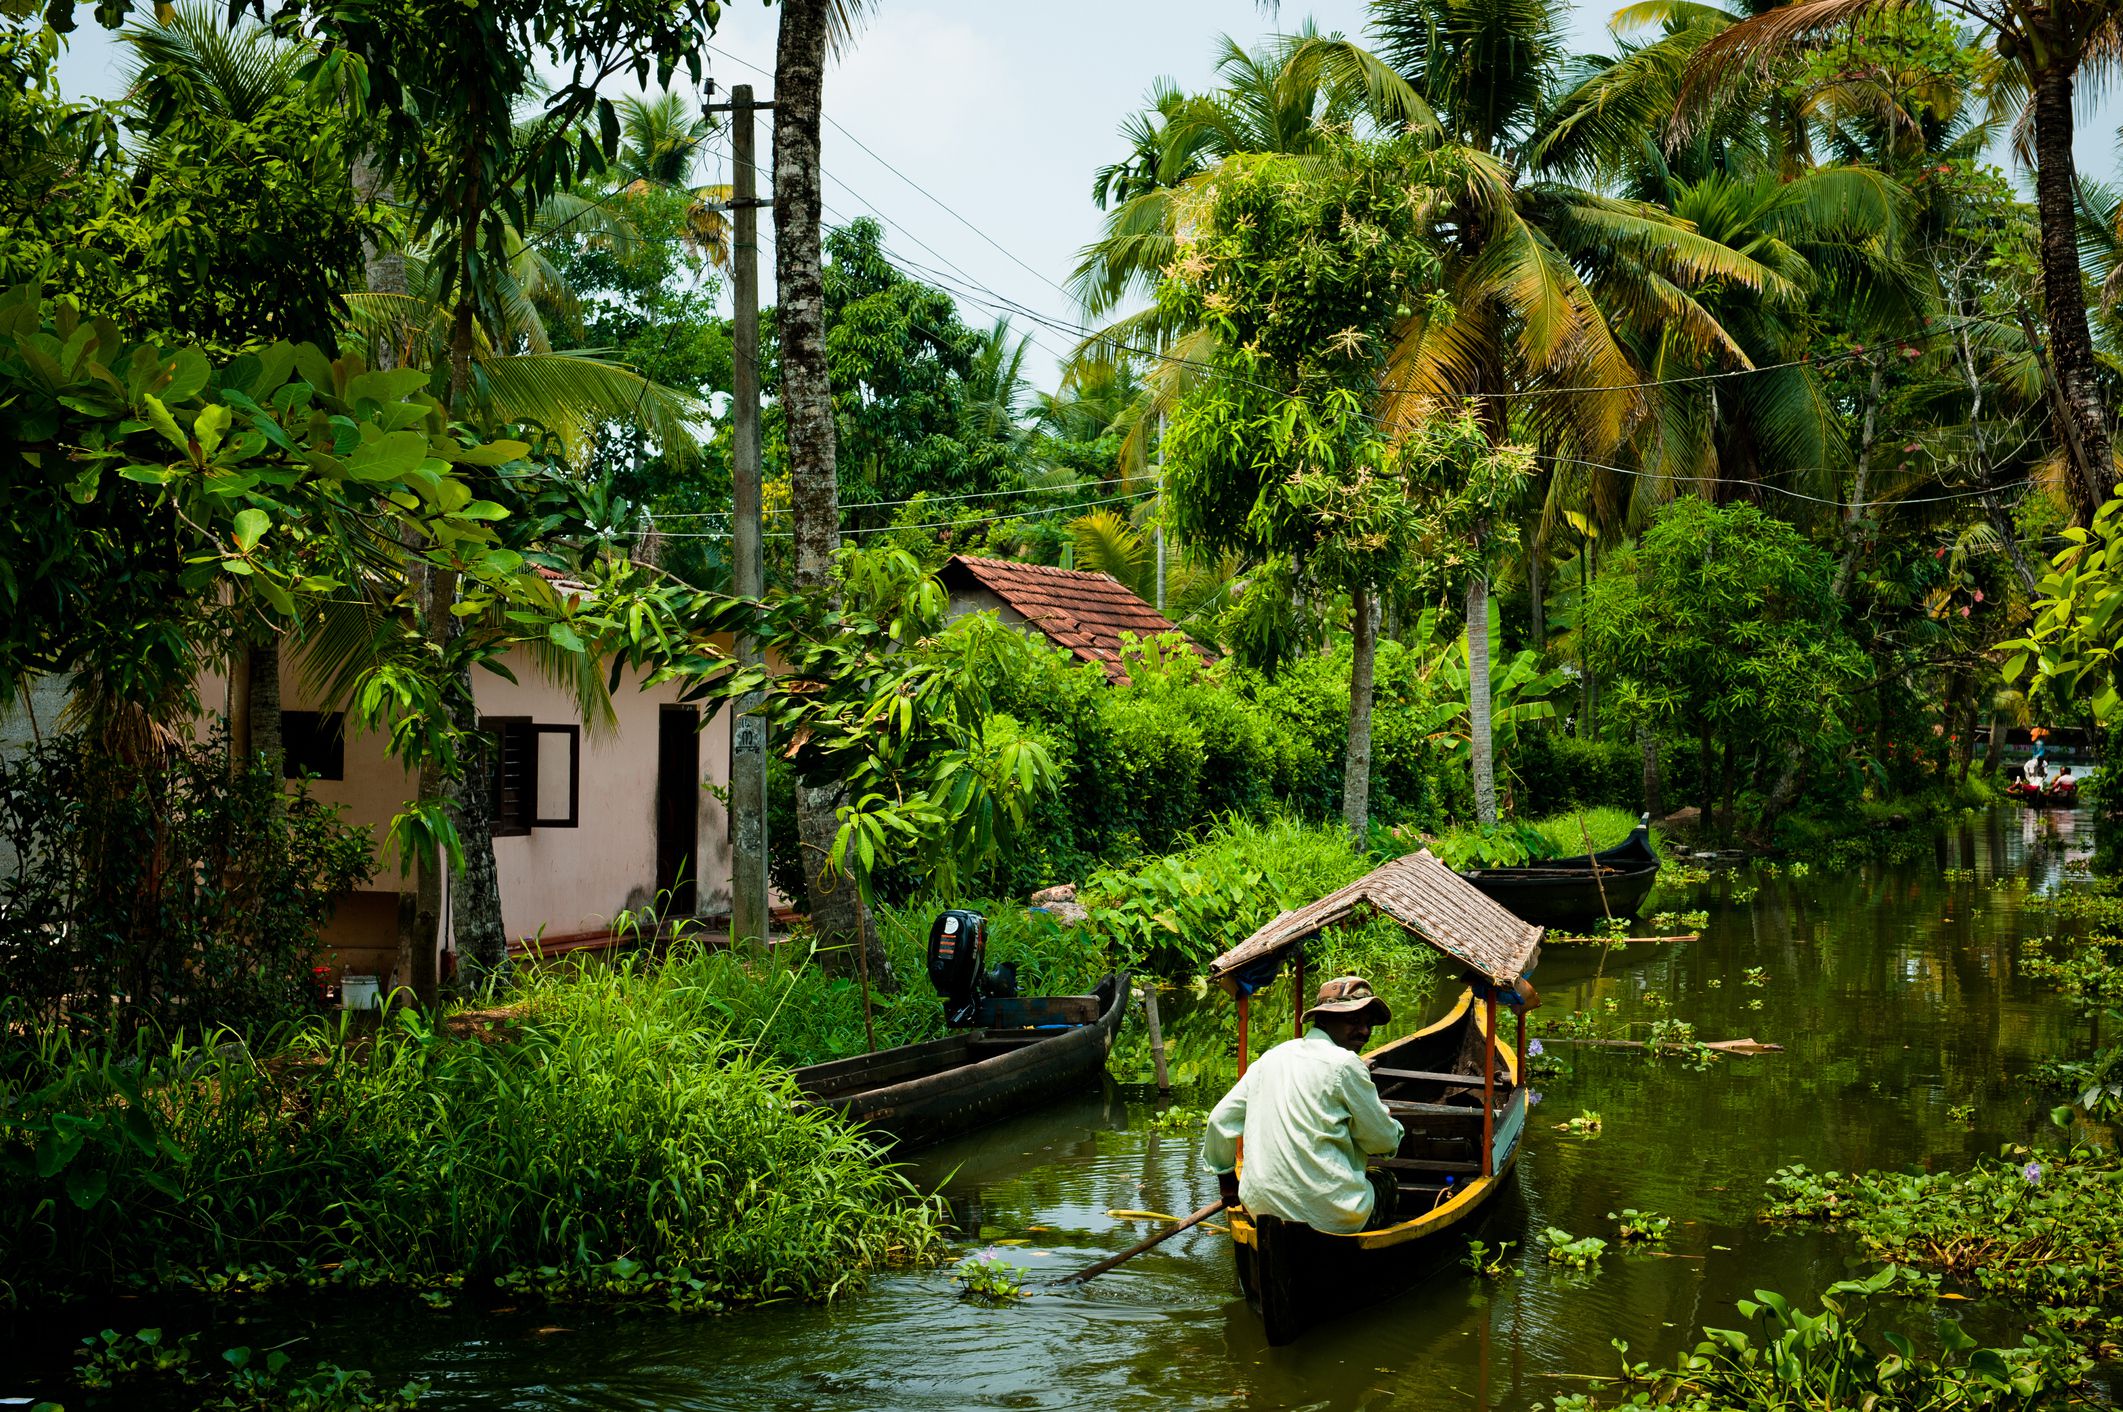 Dreamy Photo of Kerala's Backwaters Attractions